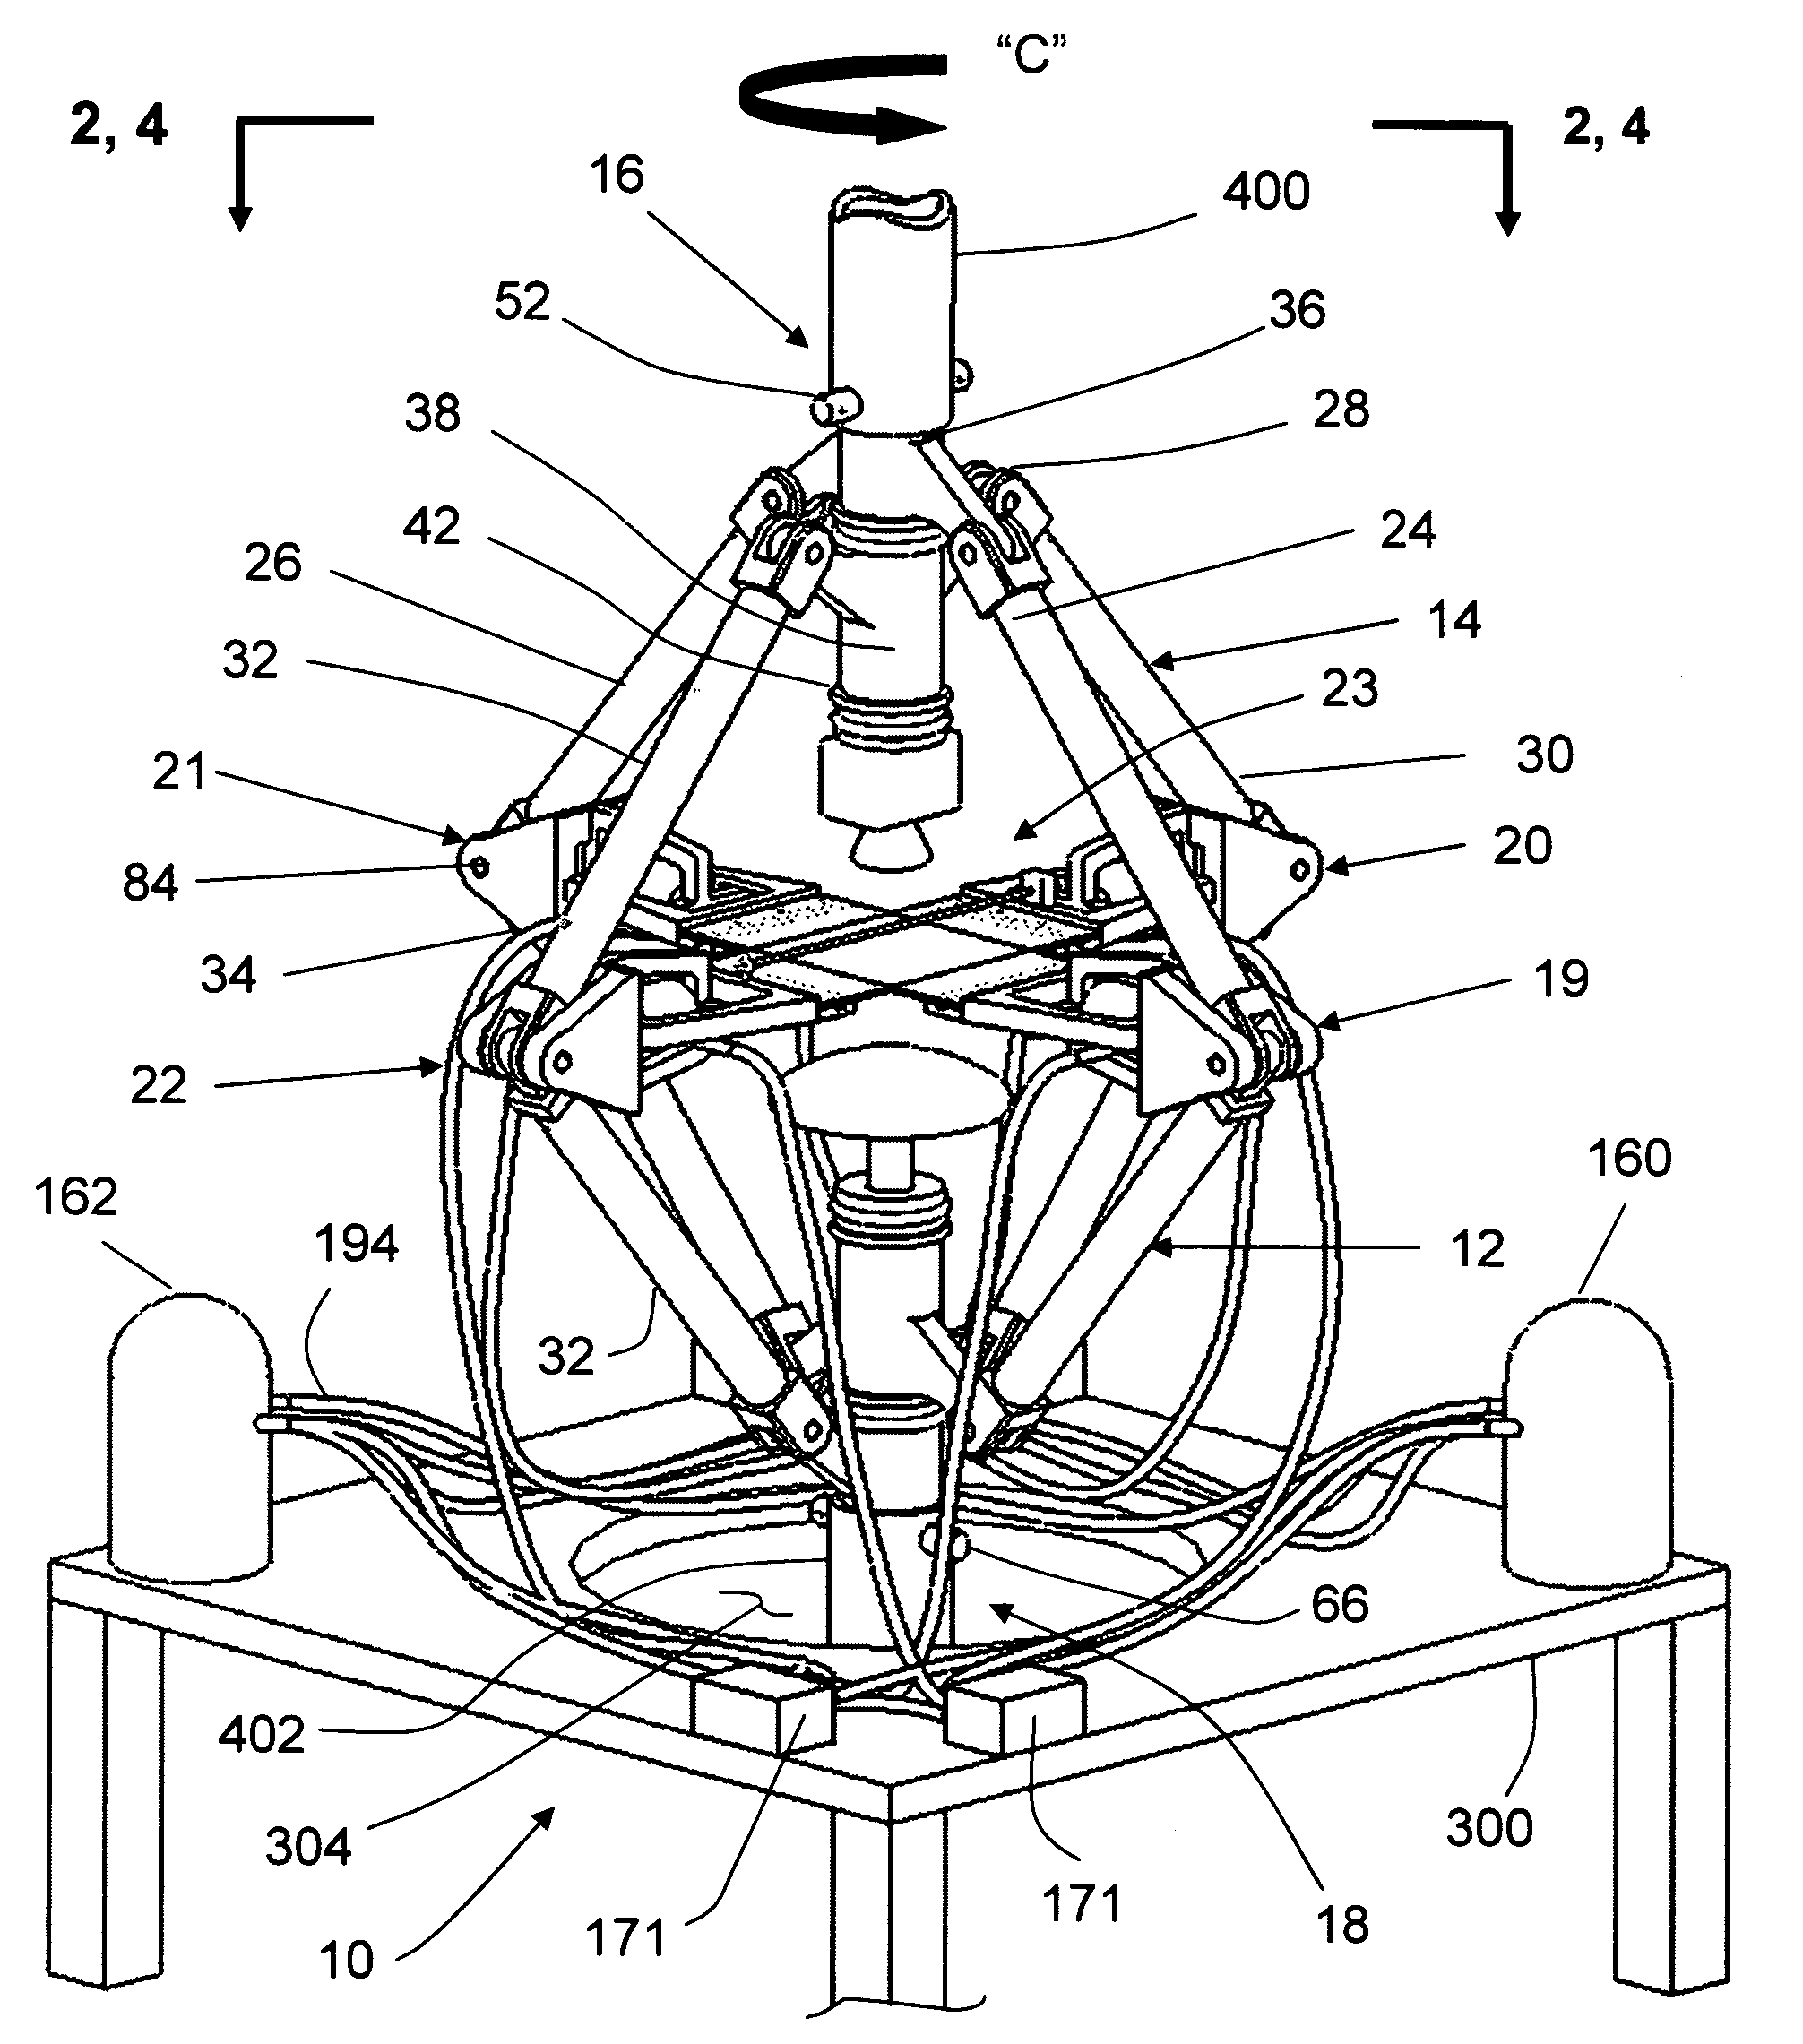 Biaxial and shear testing apparatus with force controls